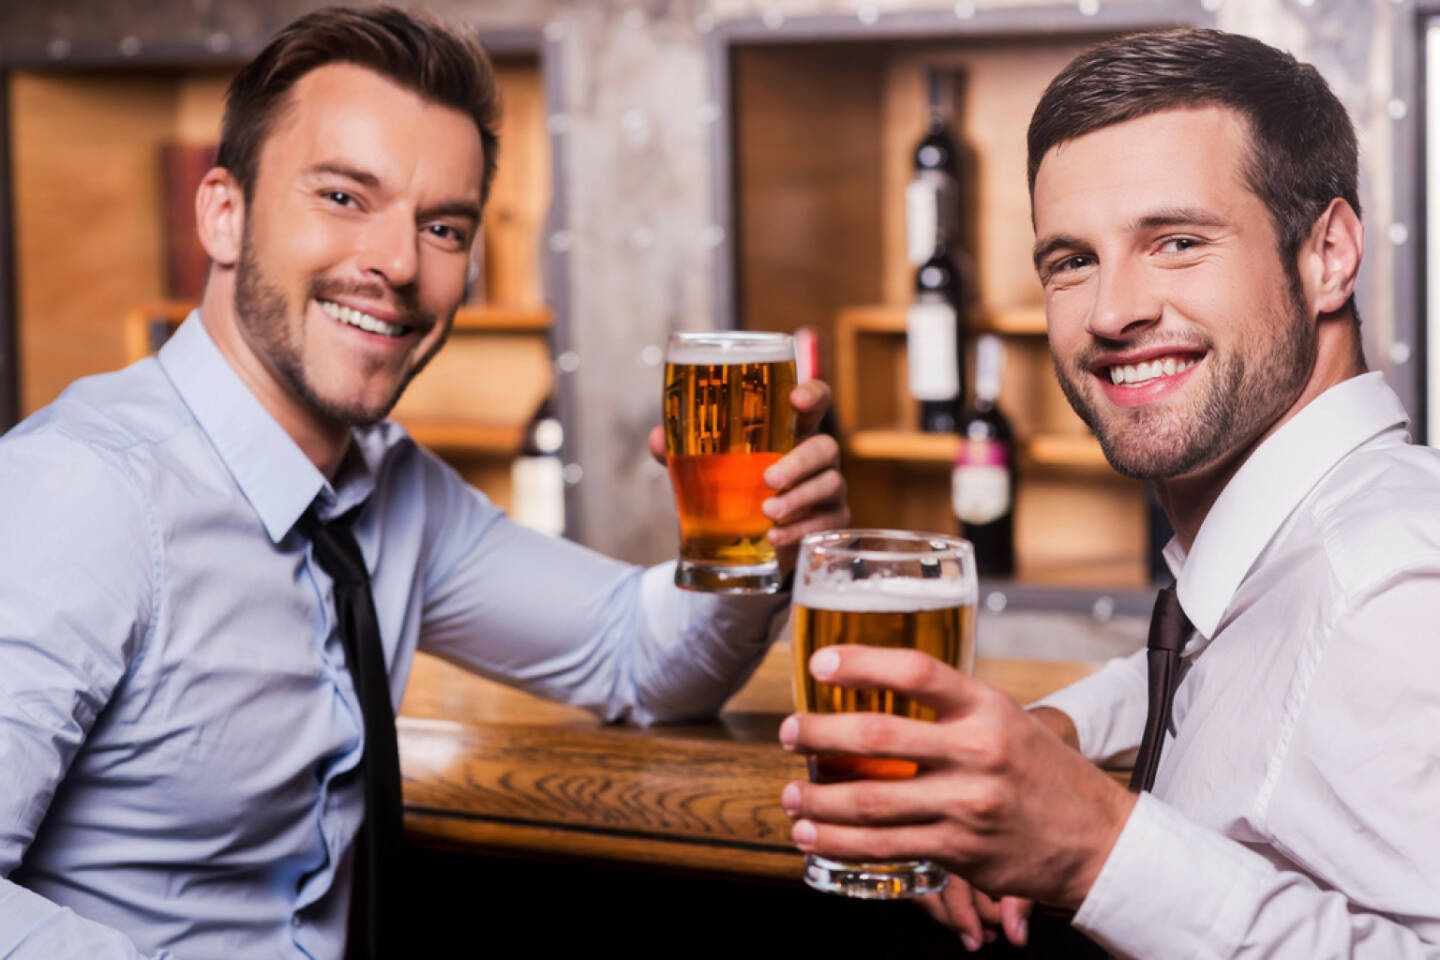 Männer, Bier, after work, Bar, Pub, relax, prost, http://www.shutterstock.com/de/pic-204688414/stock-photo-relaxing-after-hard-working-day-two-happy-young-men-in-shirt-and-tie-holding-glasses-with-beer-and.html